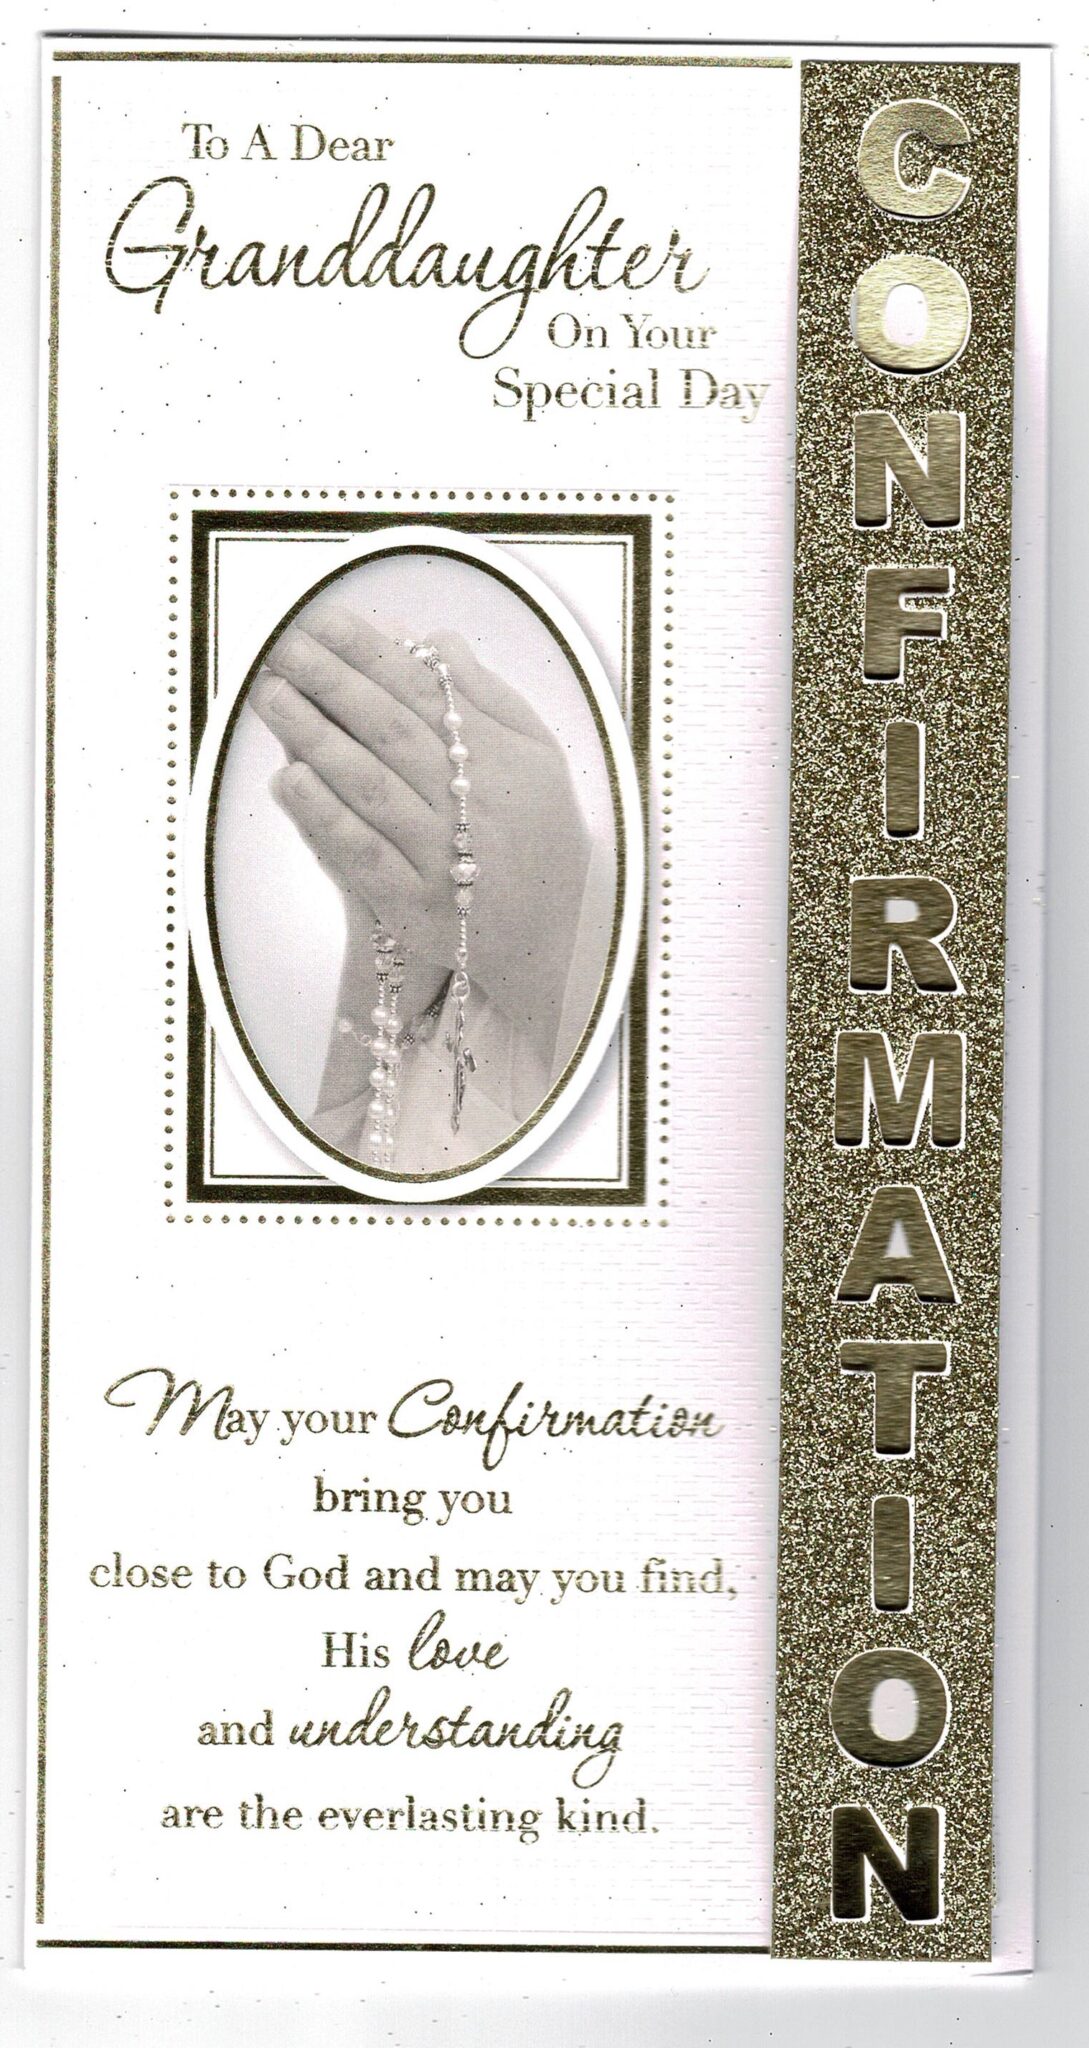 granddaughter-confirmation-card-to-a-dear-granddaughter-on-your